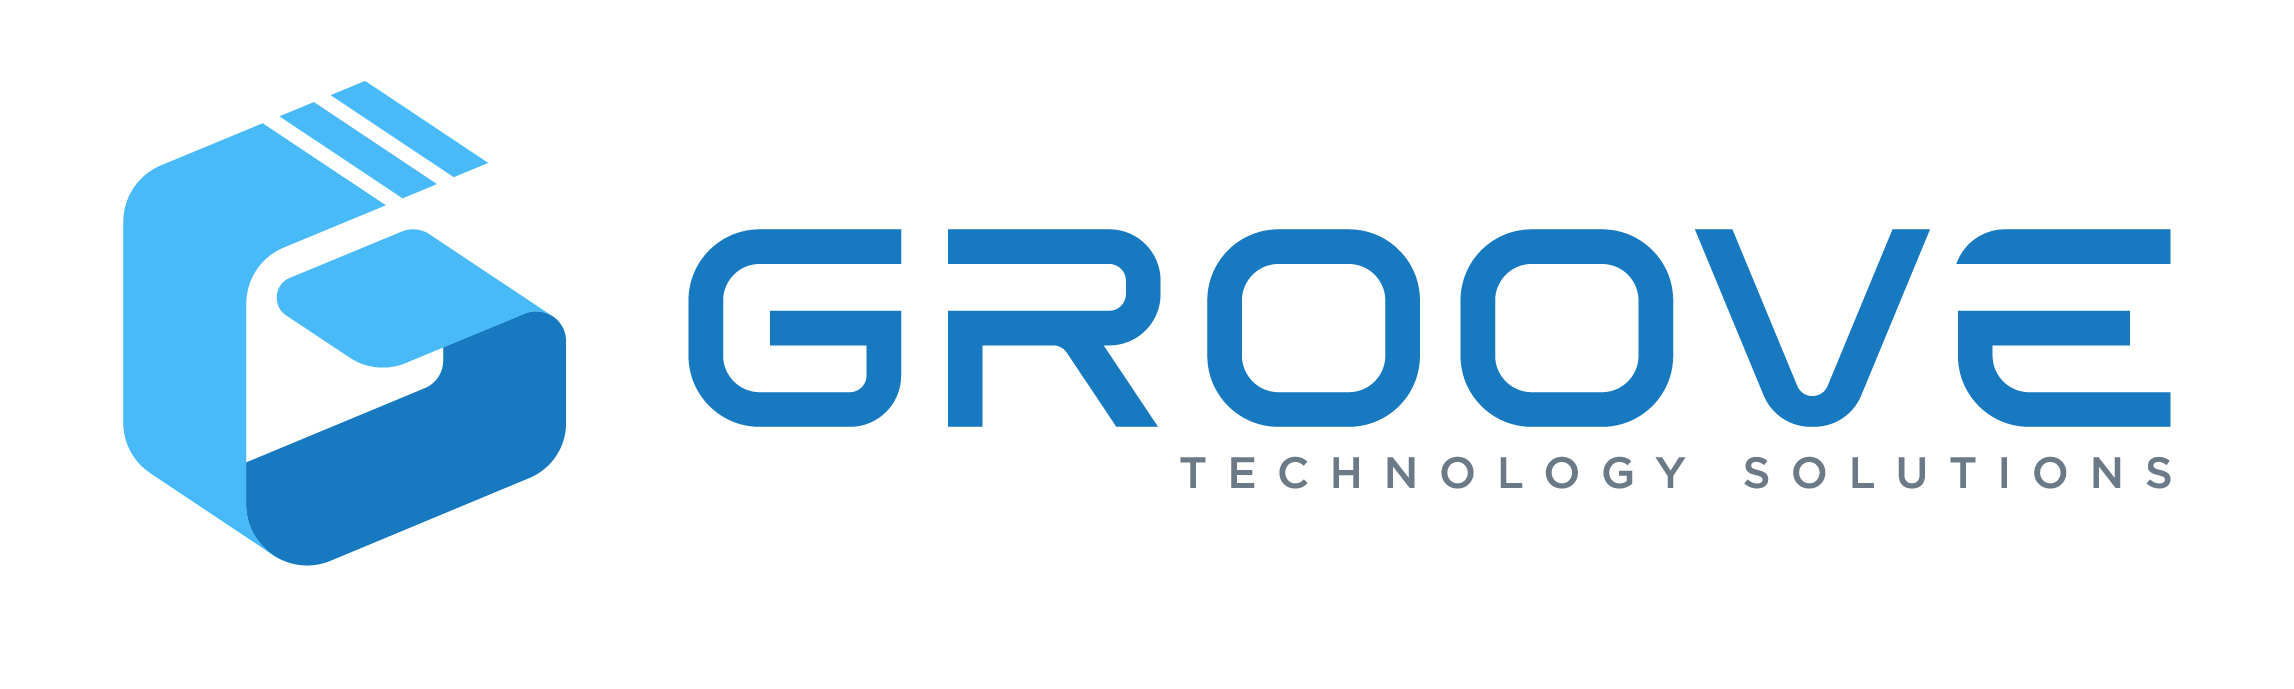 Groove Technology Solutions logo